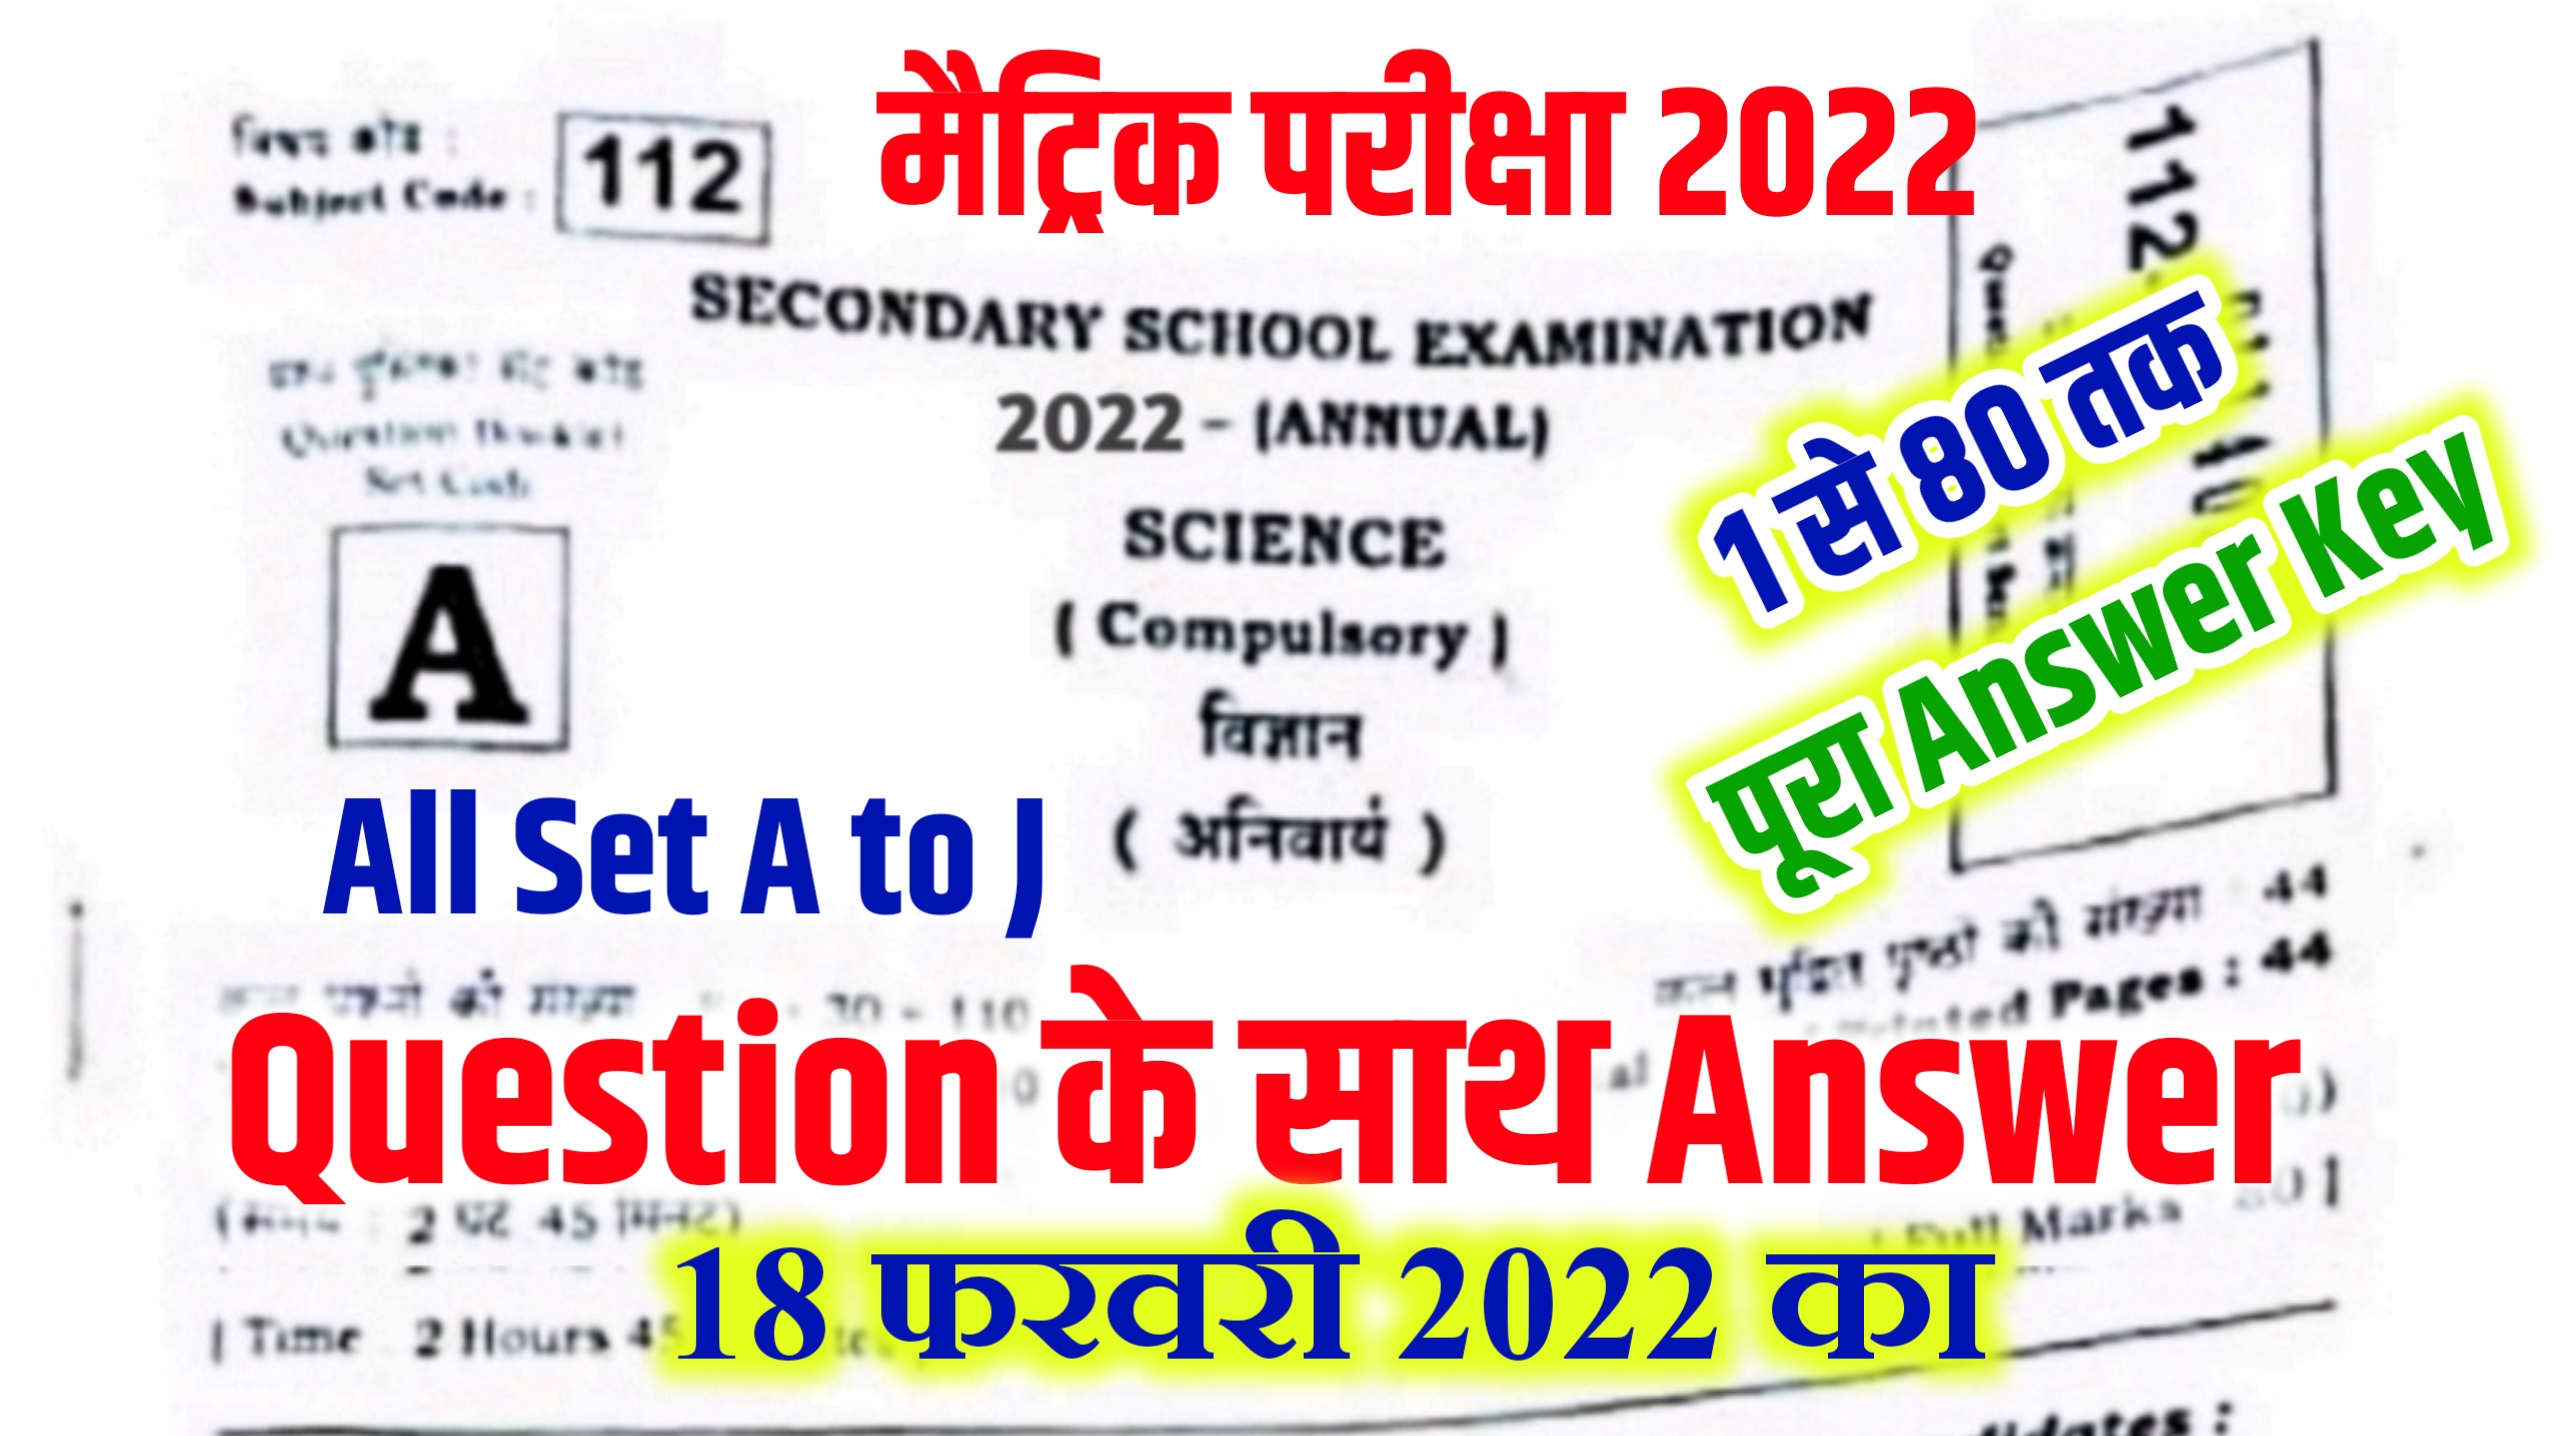 Bihar Board 10th Science Answer Key 2022 ~ 18 February | Bseb Matric Science Answer Key 2022 With Question Paper